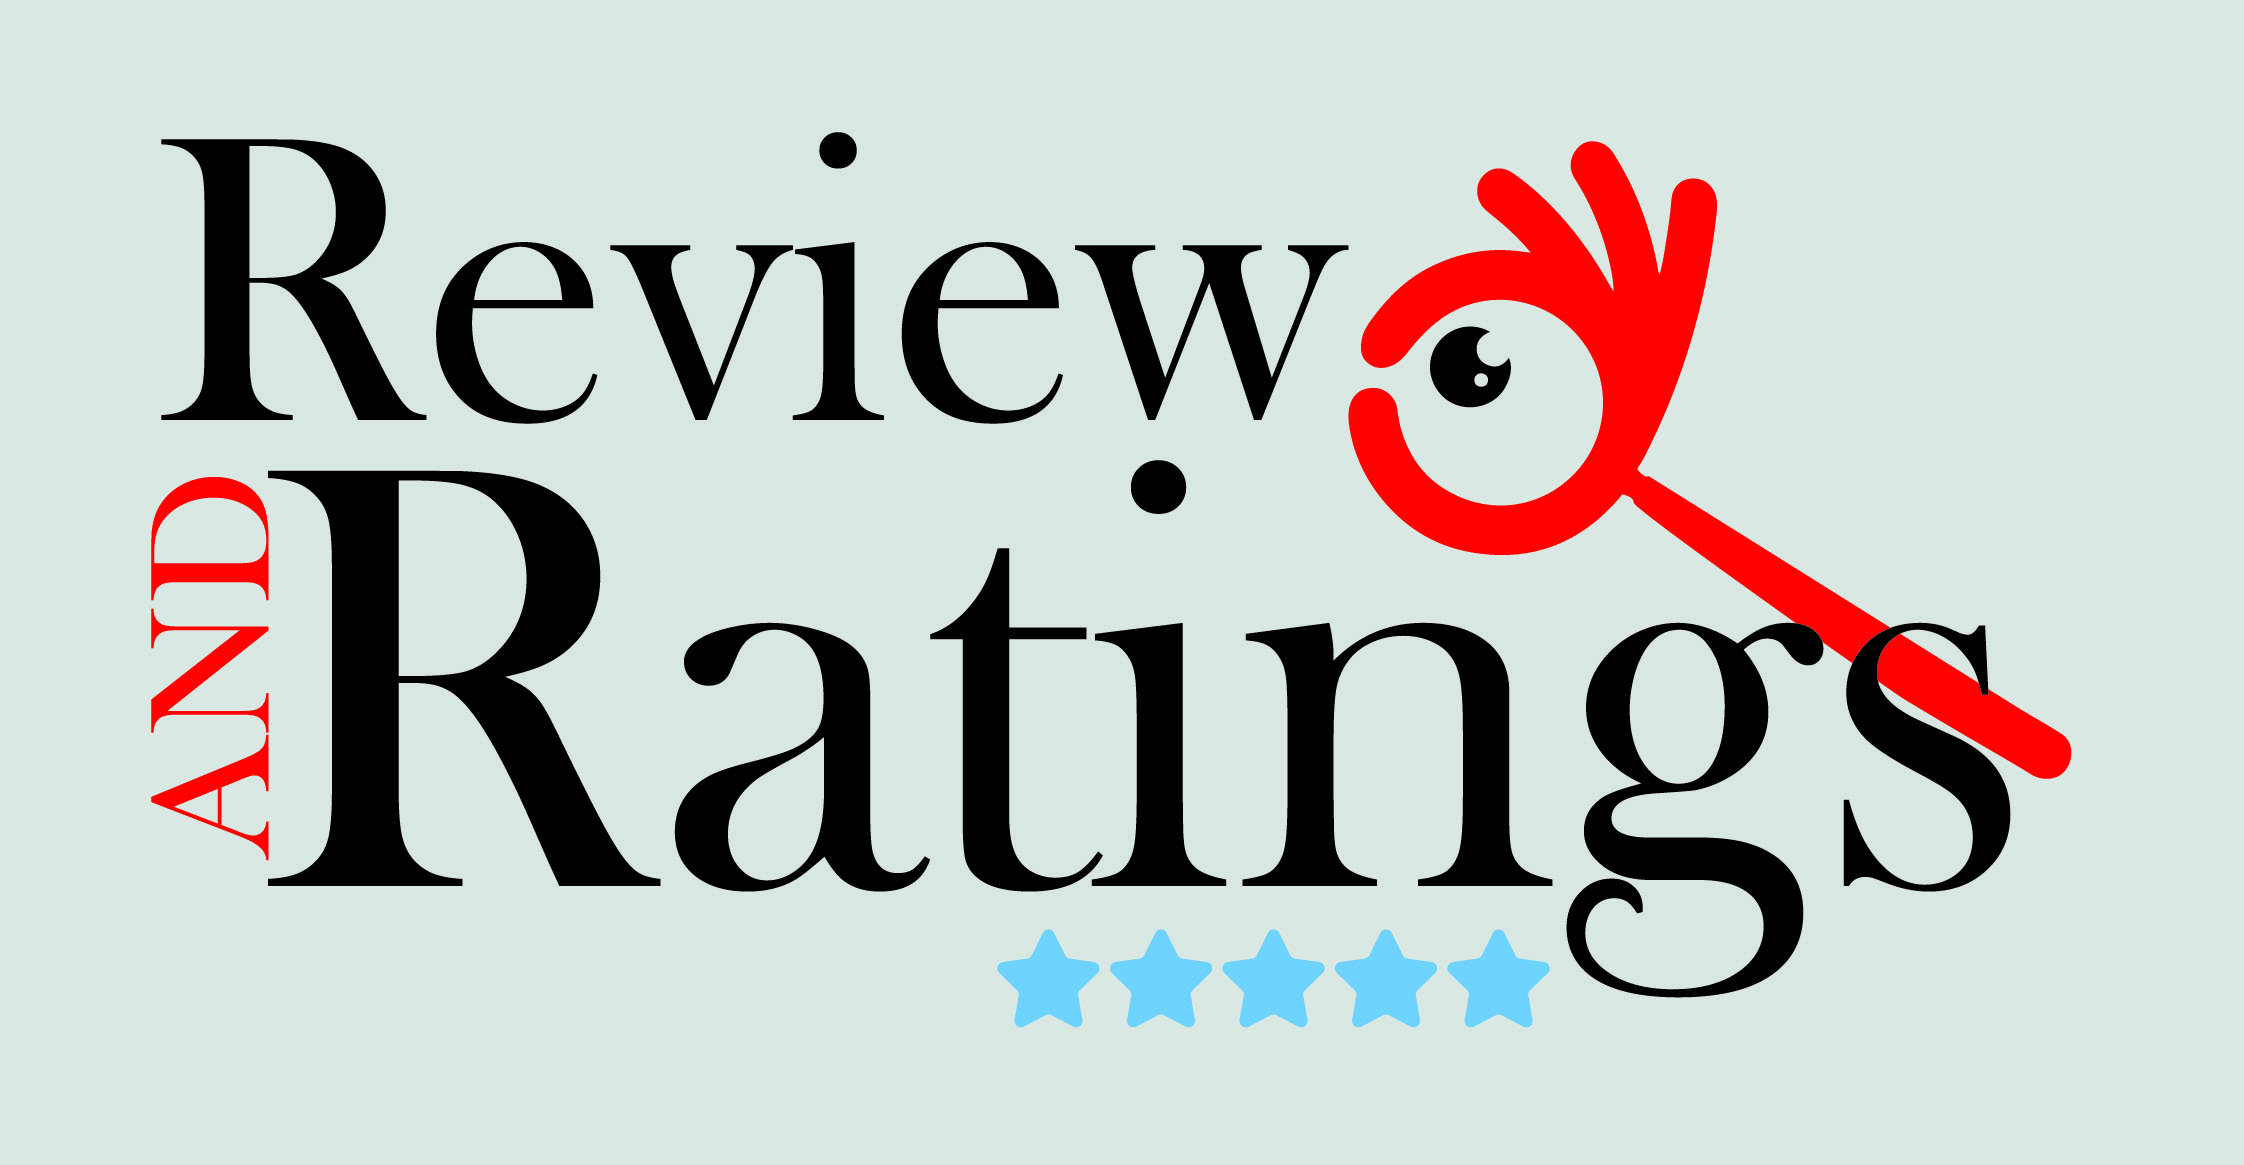 REVIEW AND RATINGS